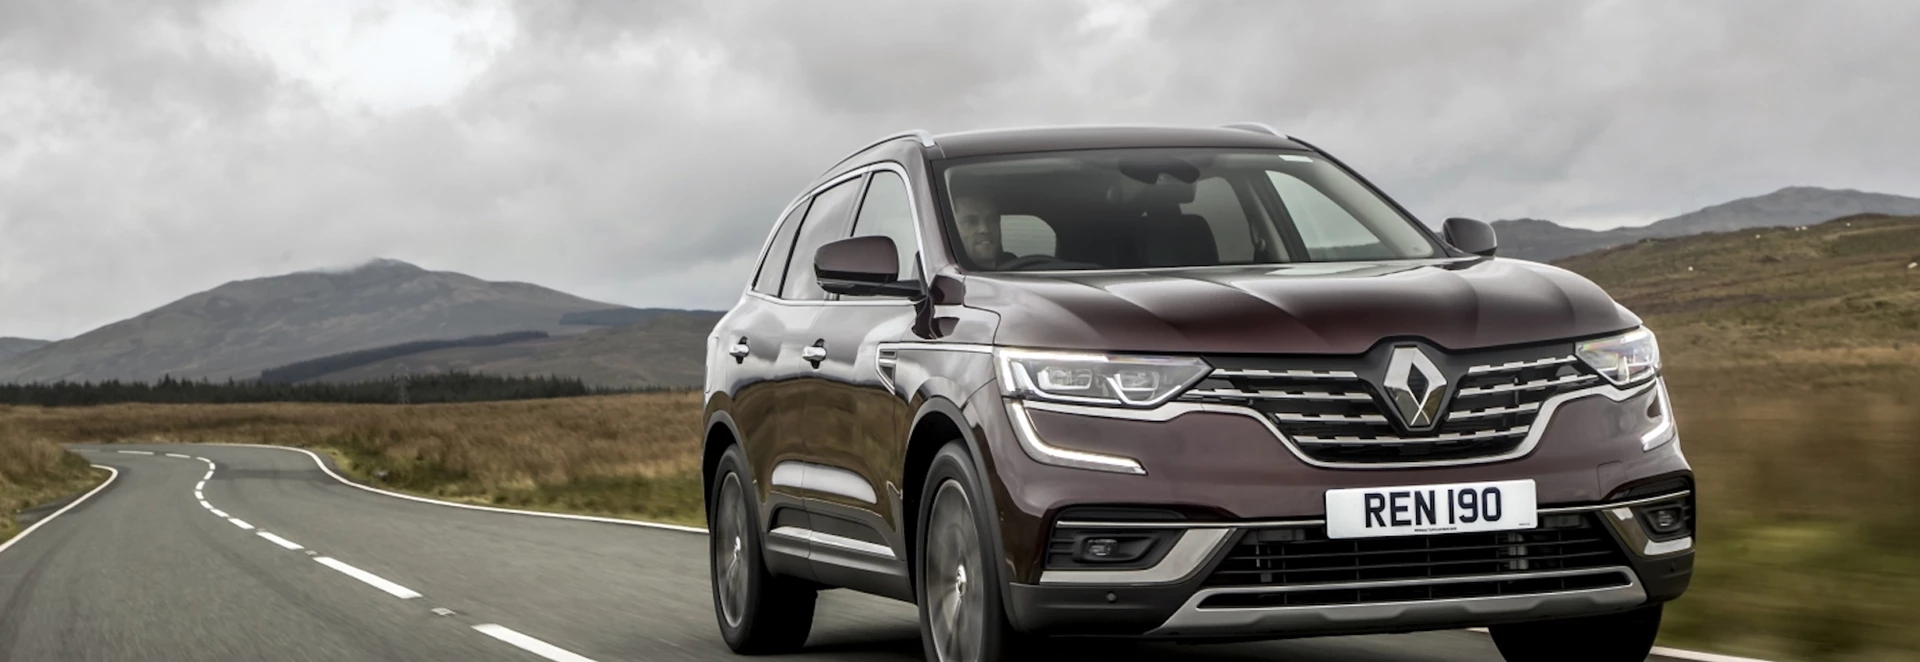 Buyer’s guide to the Renault Koleos 